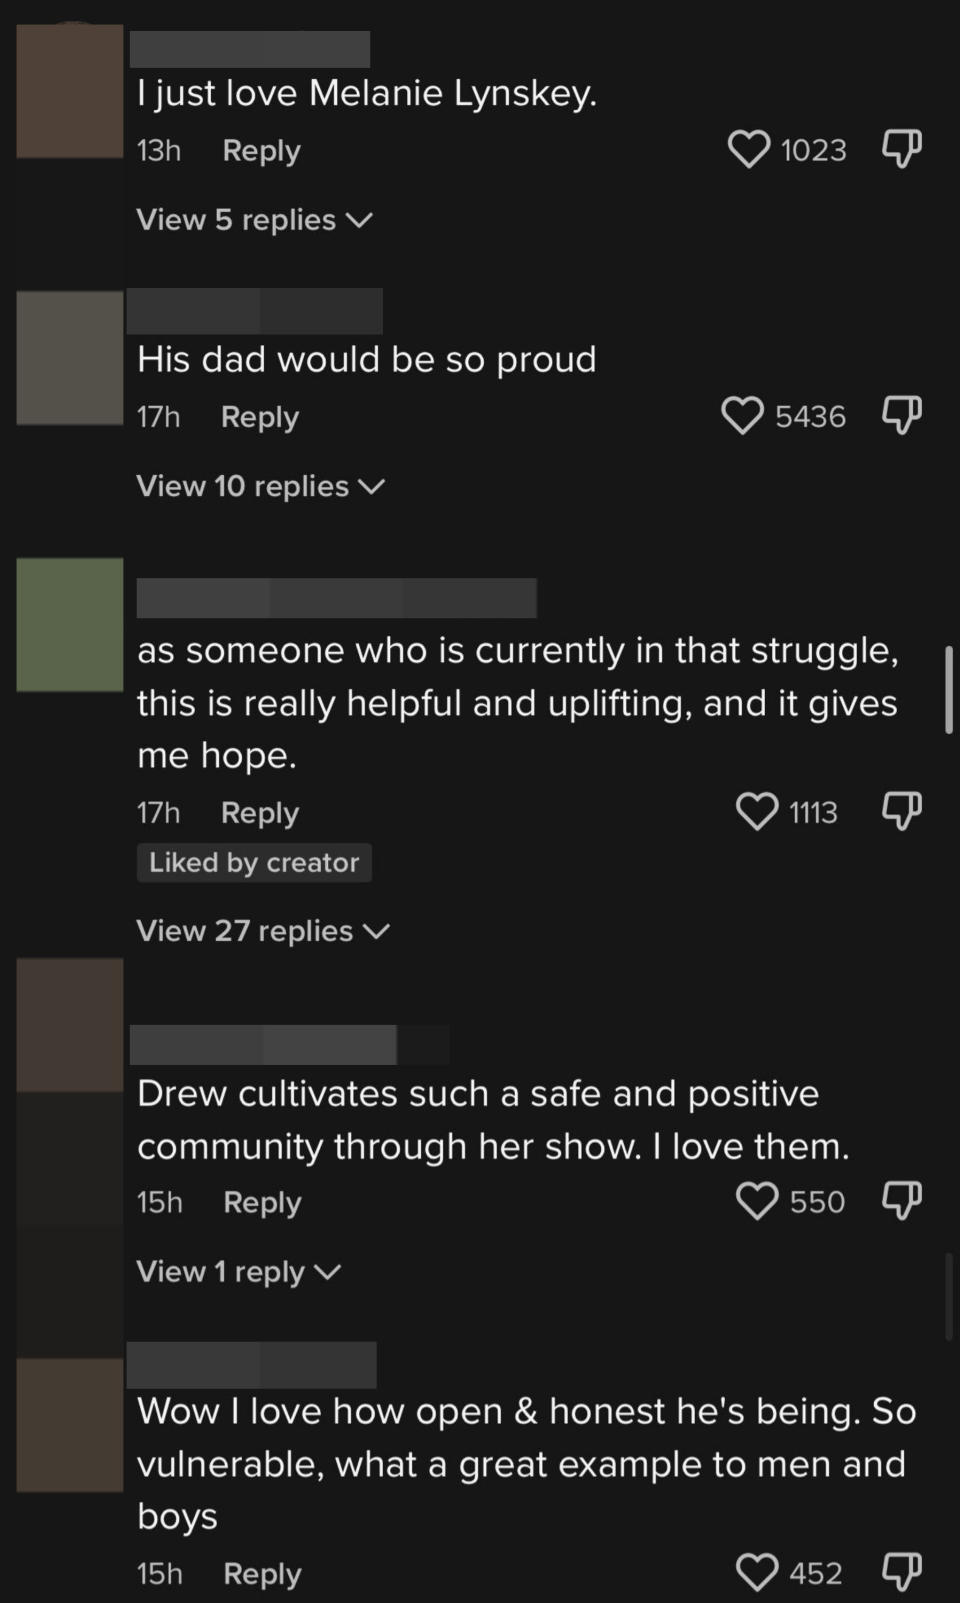 Comments including "His dad would be so proud," "Drew cultivates such a safe and positive community through her show," and "I love how open and honest he's being"